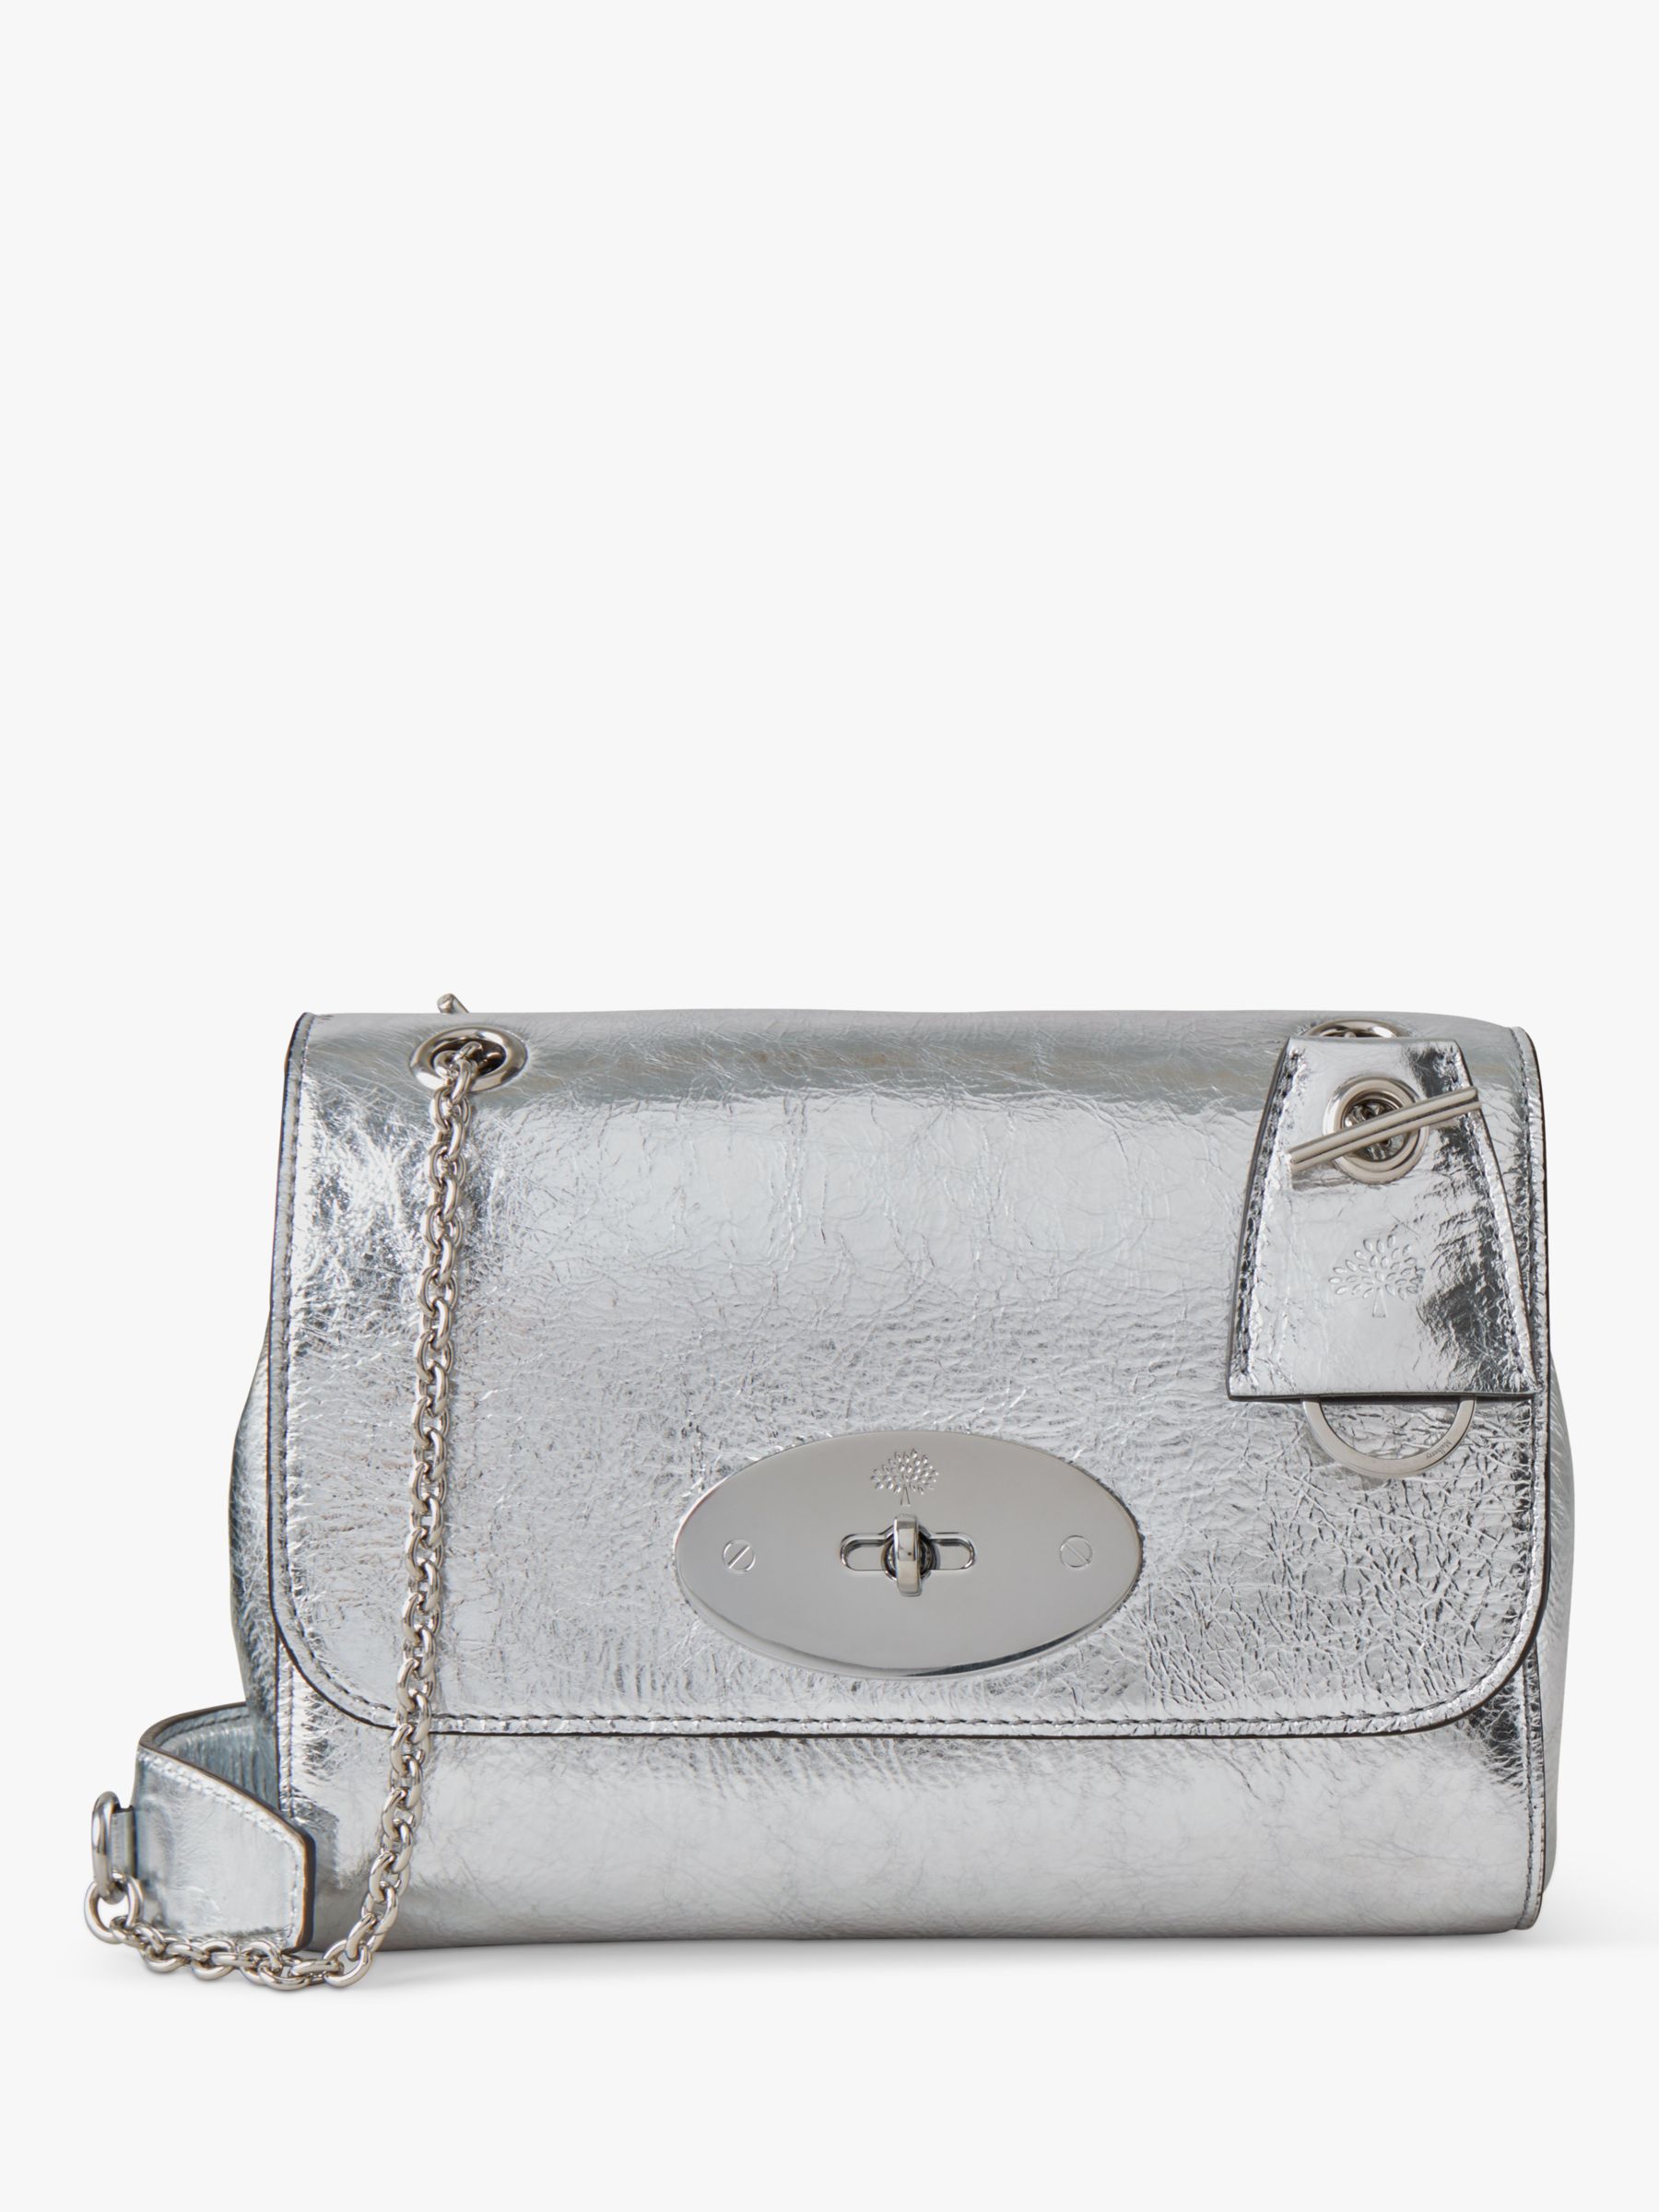 Mulberry Lily Crinkled Metallic Leather Top Handle Bag